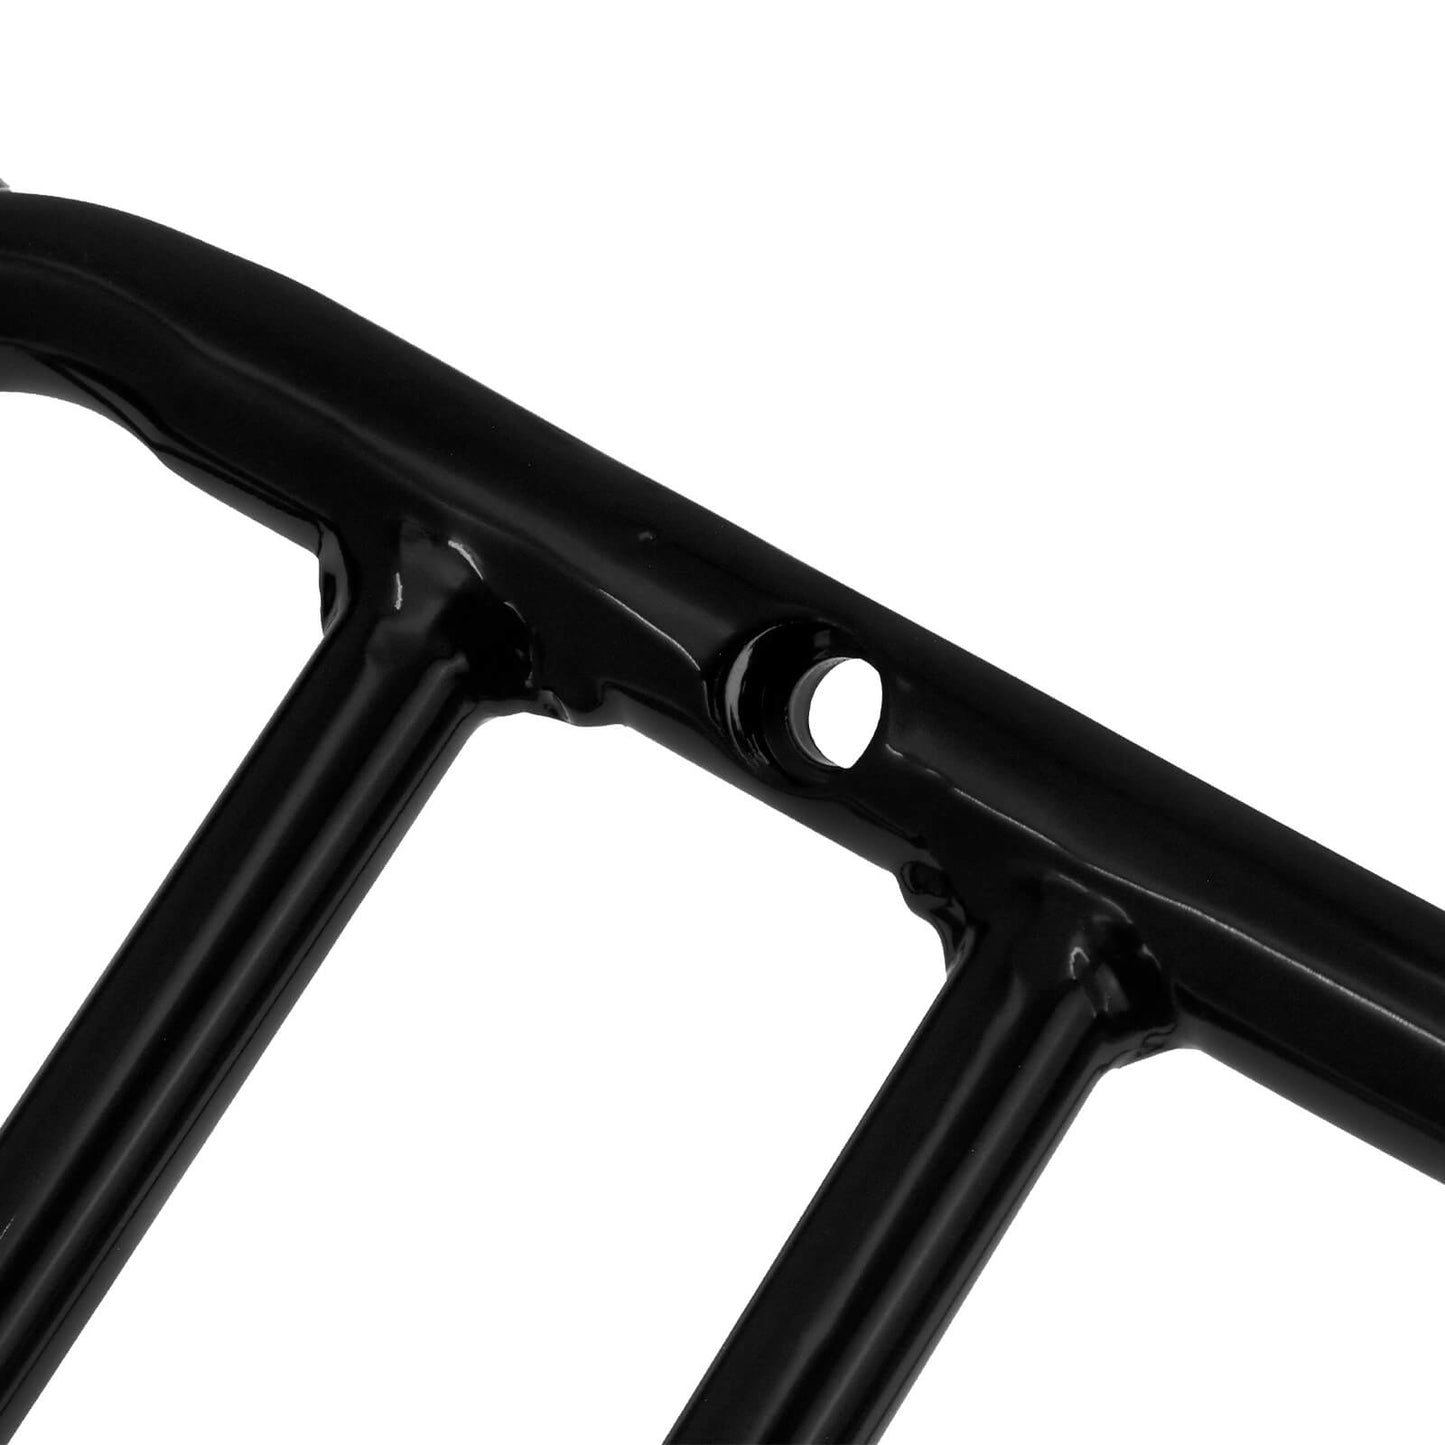 MACTIONS harley luggage racks for motorcycles TH015703